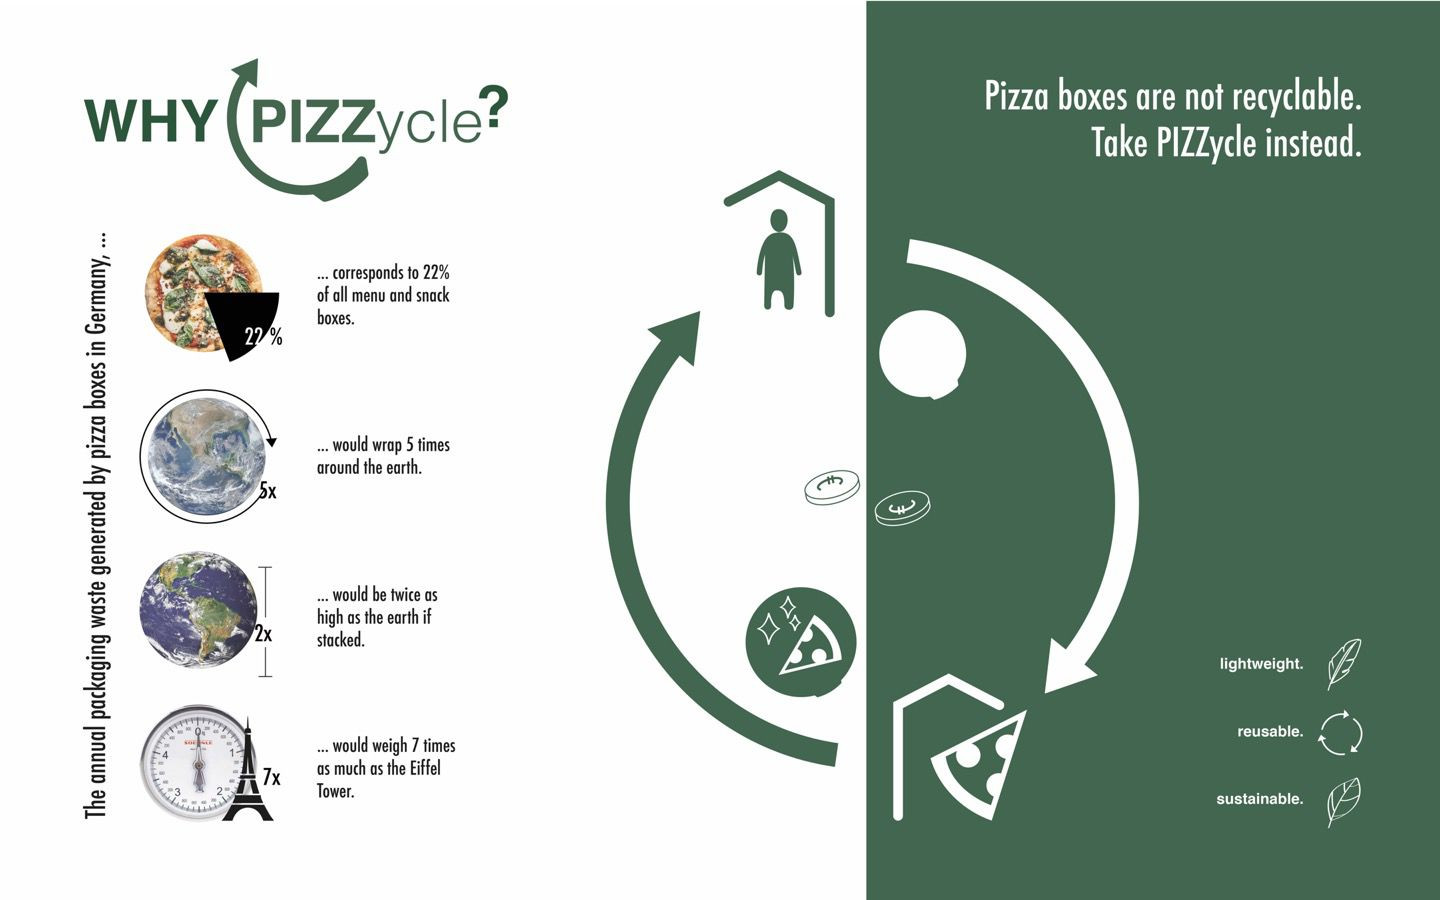 PIZZZycle